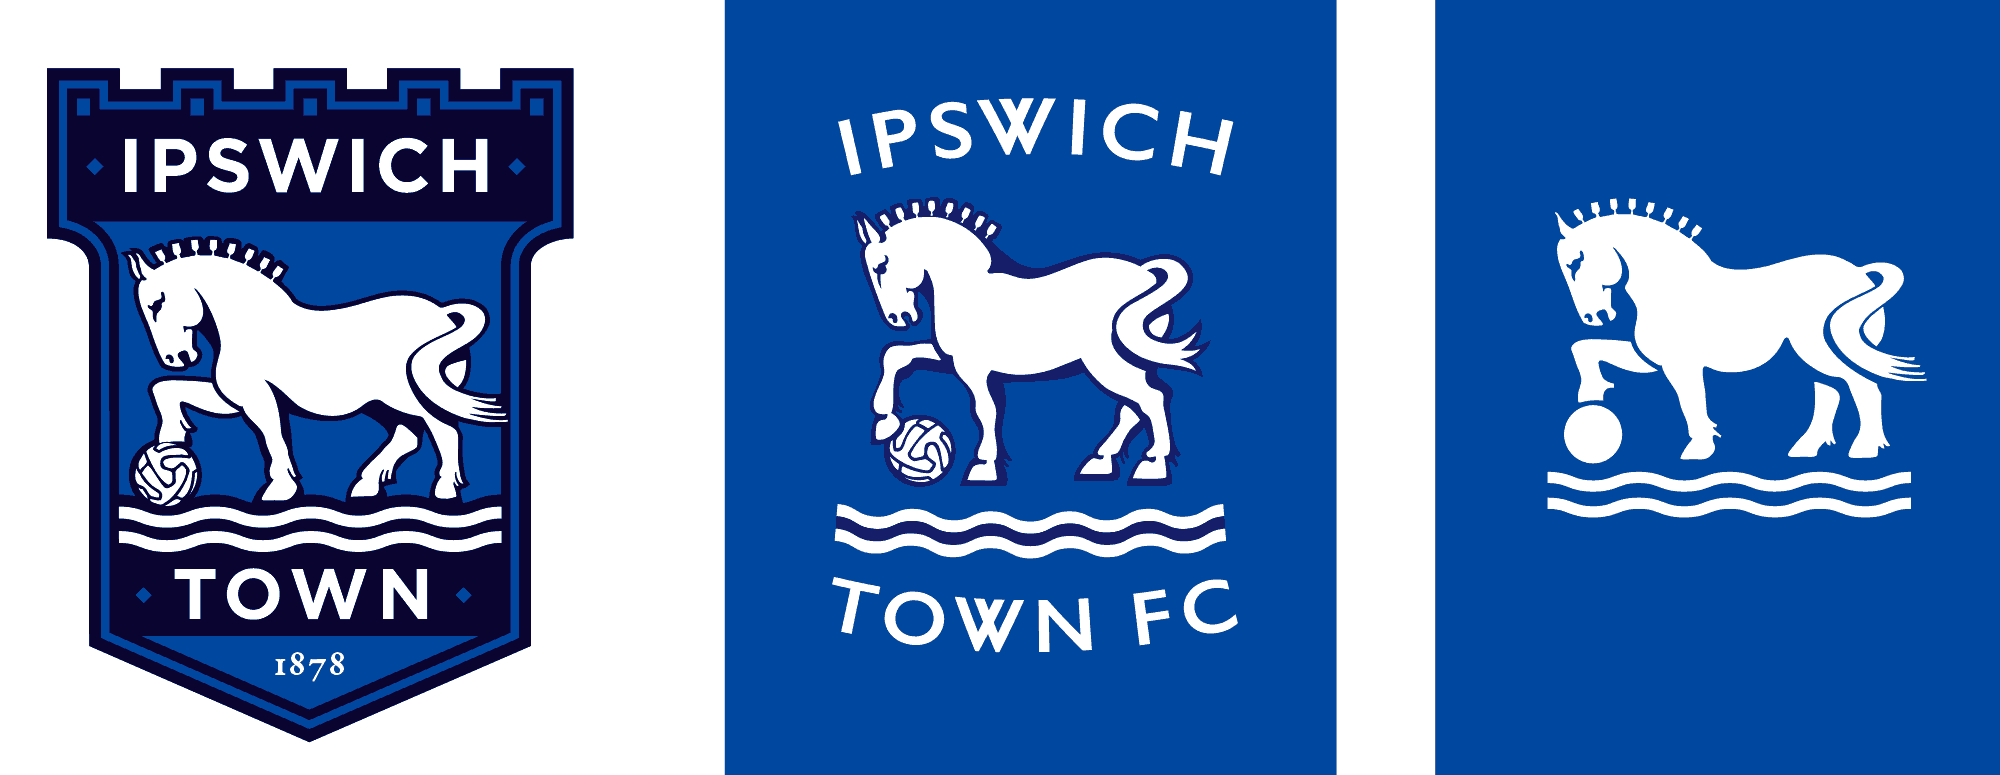 Come Hither Design, Ipswich Town logos. Work in progress